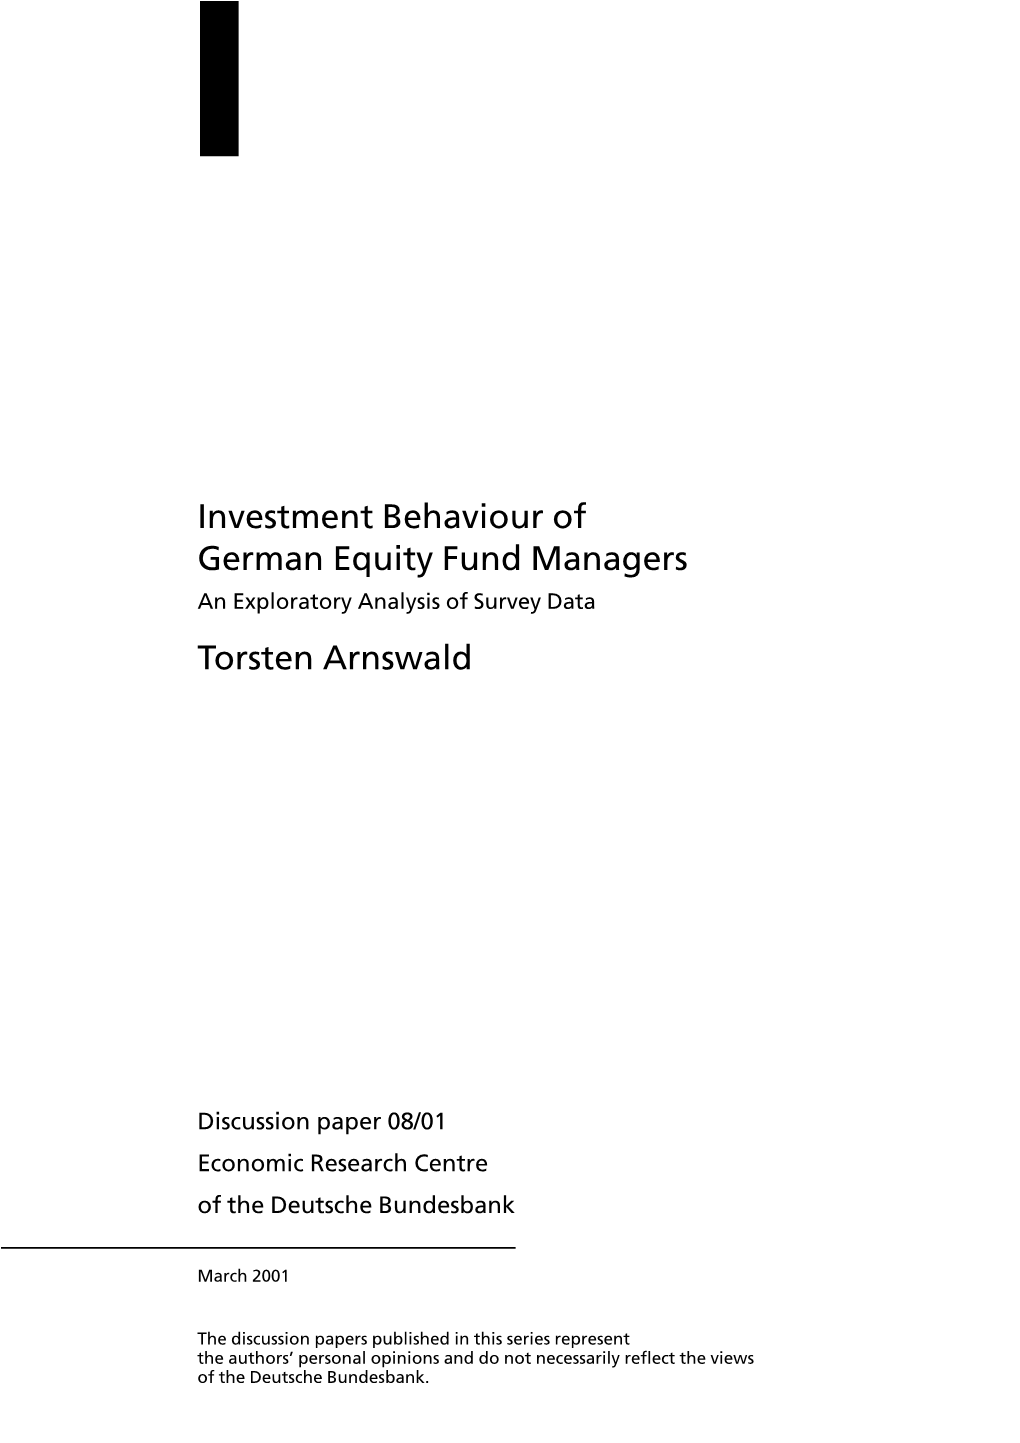 Investment Behaviour of German Equity Fund Managers an Exploratory Analysis of Survey Data Torsten Arnswald